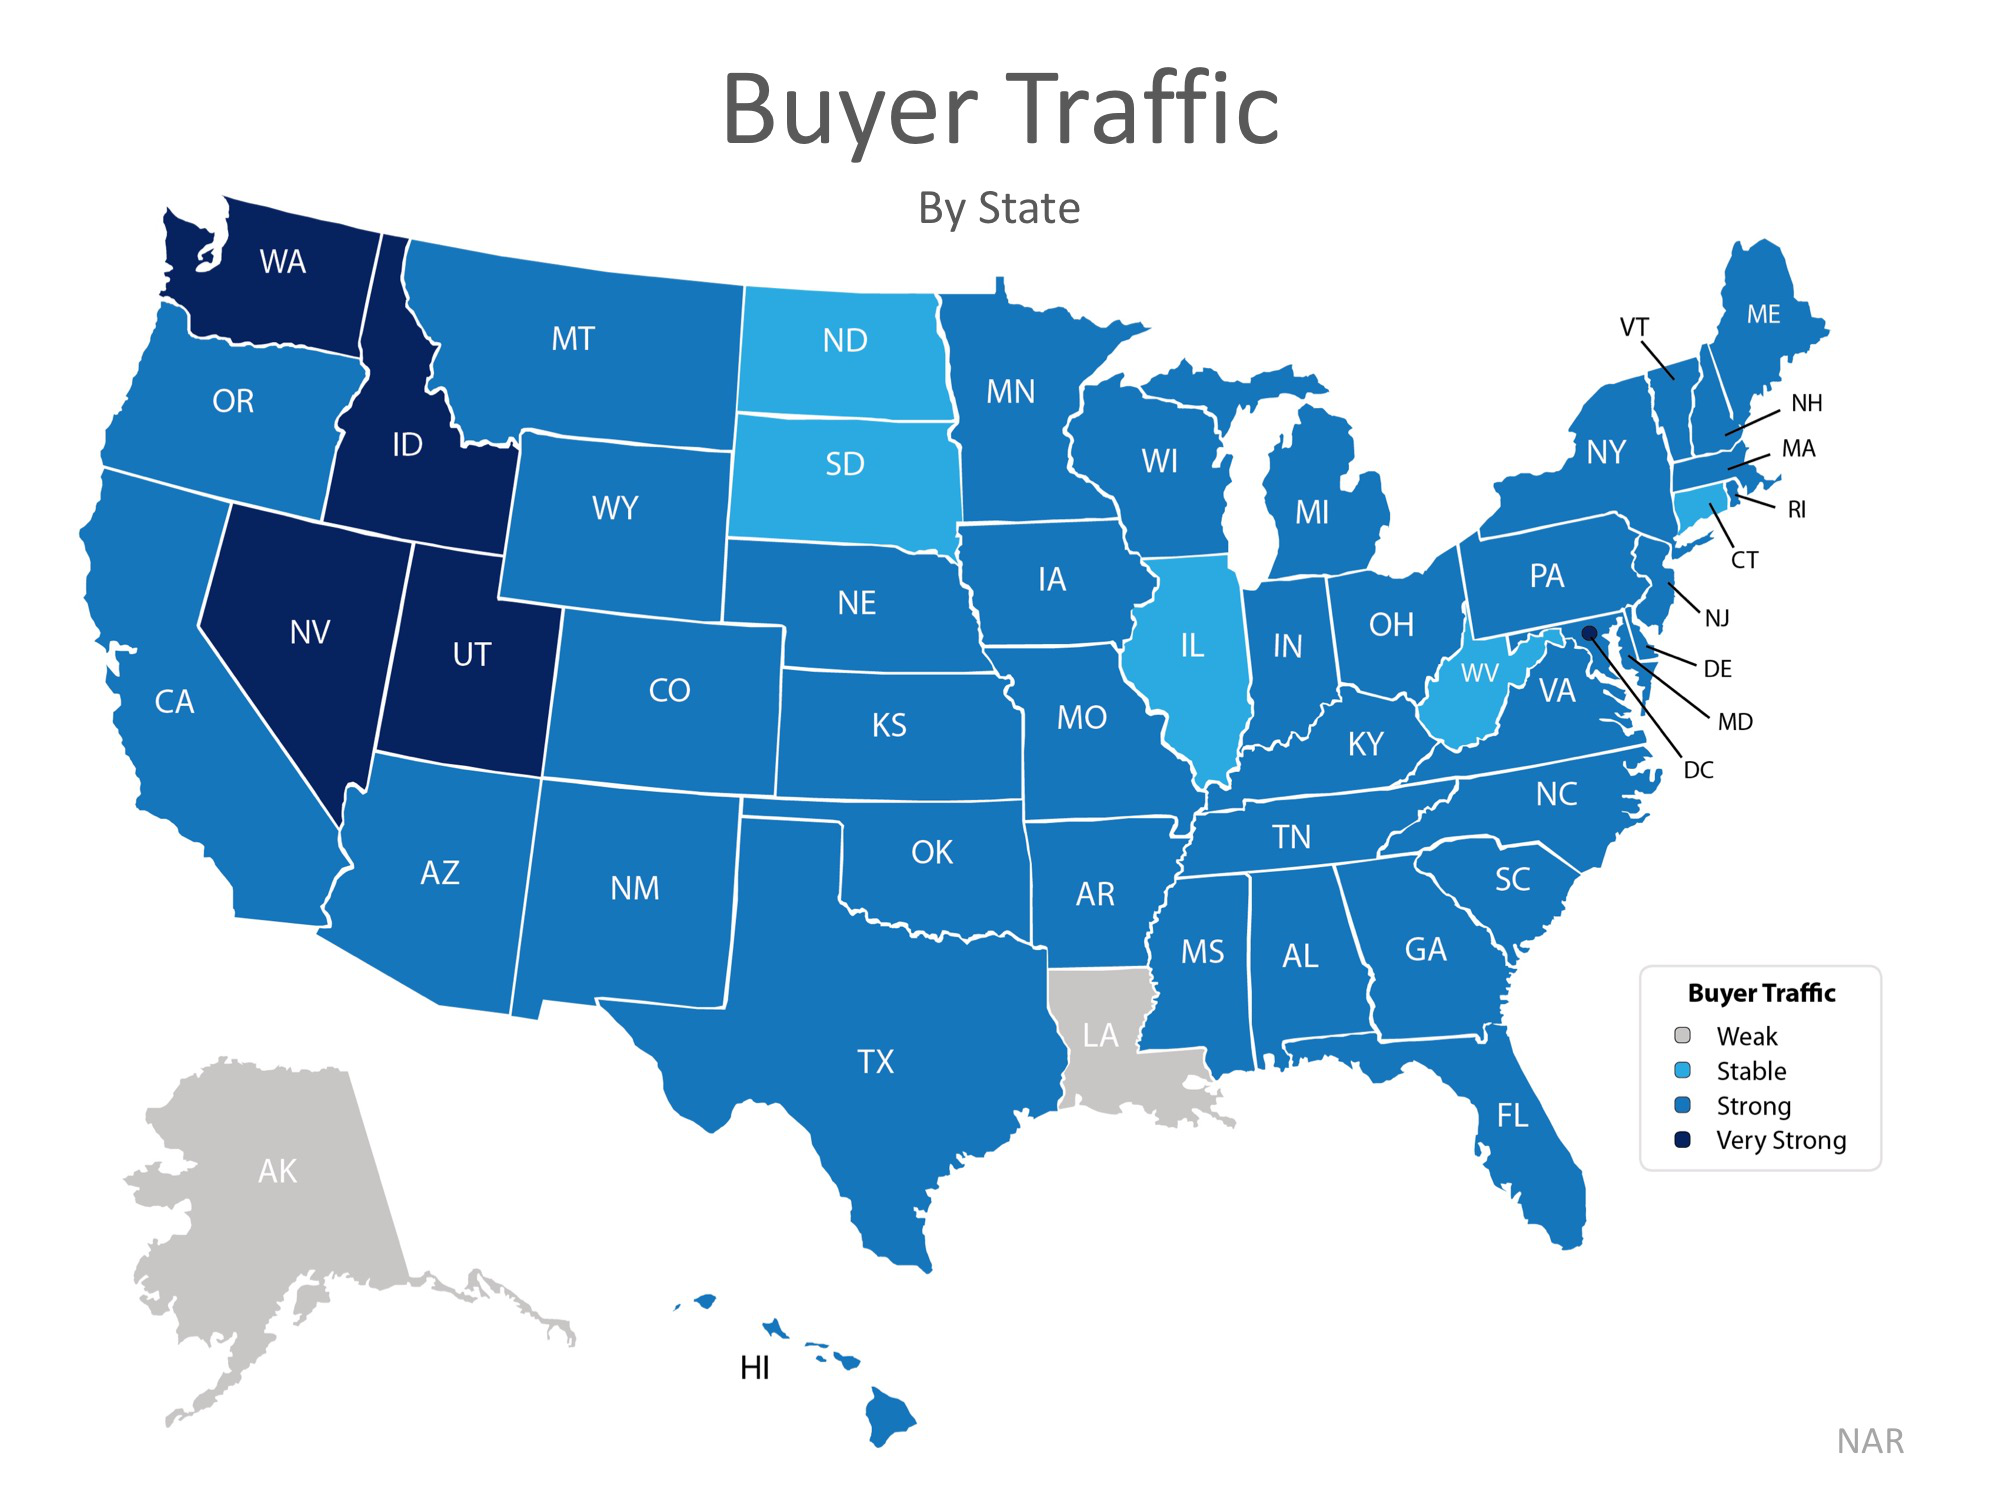 Buyer traffic by state map infographic